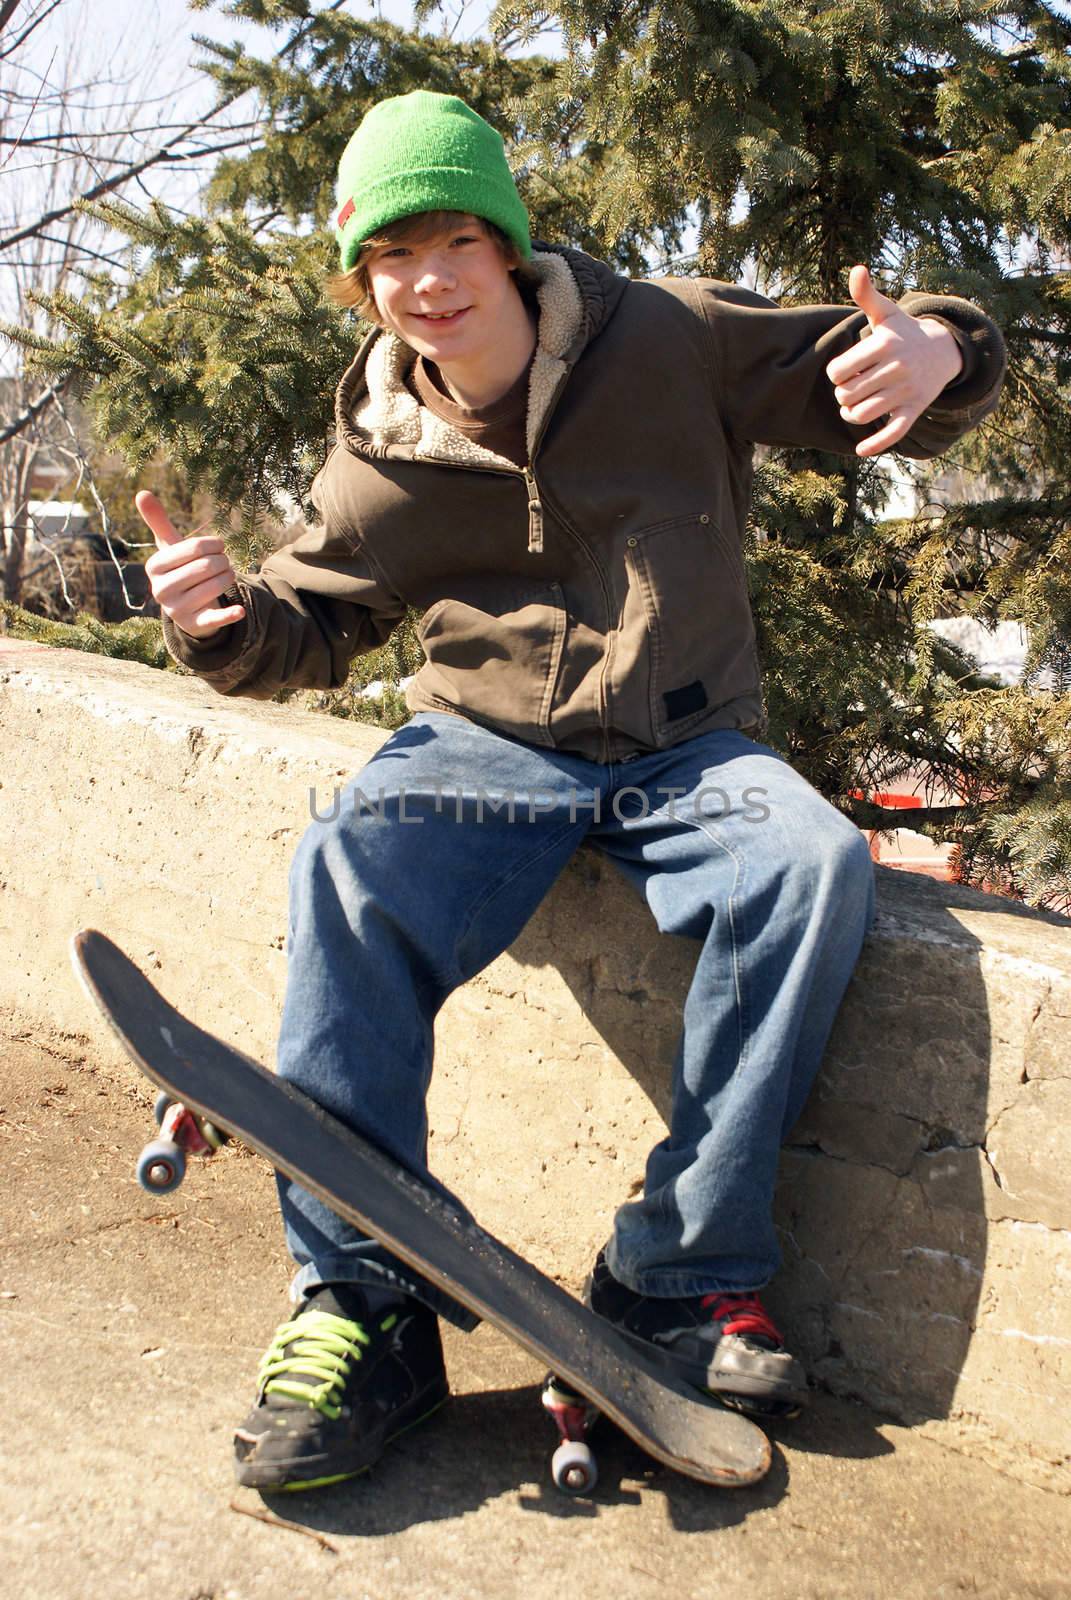 A young skateboarder poses outside on a concrete ledge.